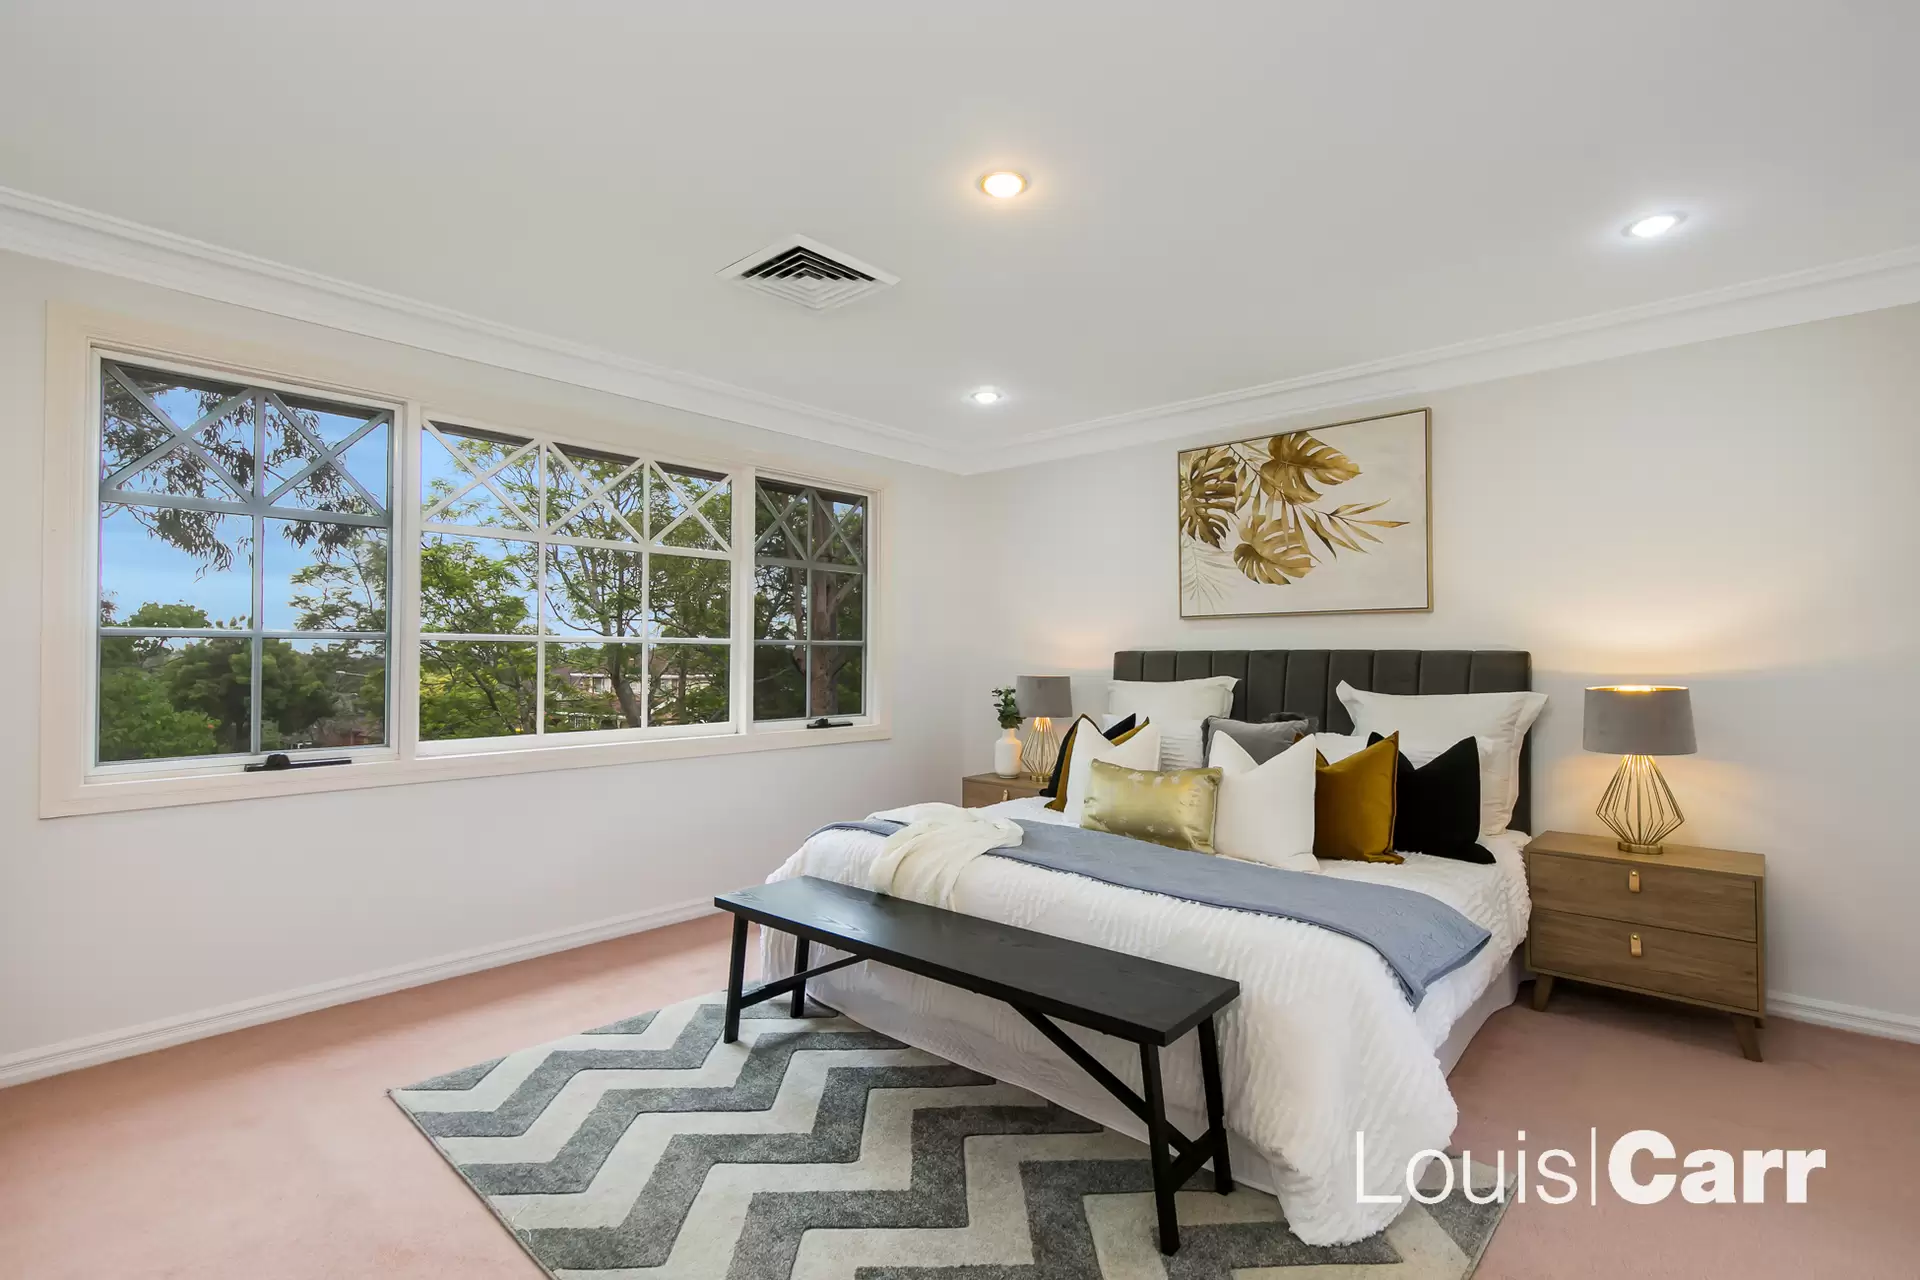 Photo #16: 18 Josephine Crescent, Cherrybrook - Auction by Louis Carr Real Estate